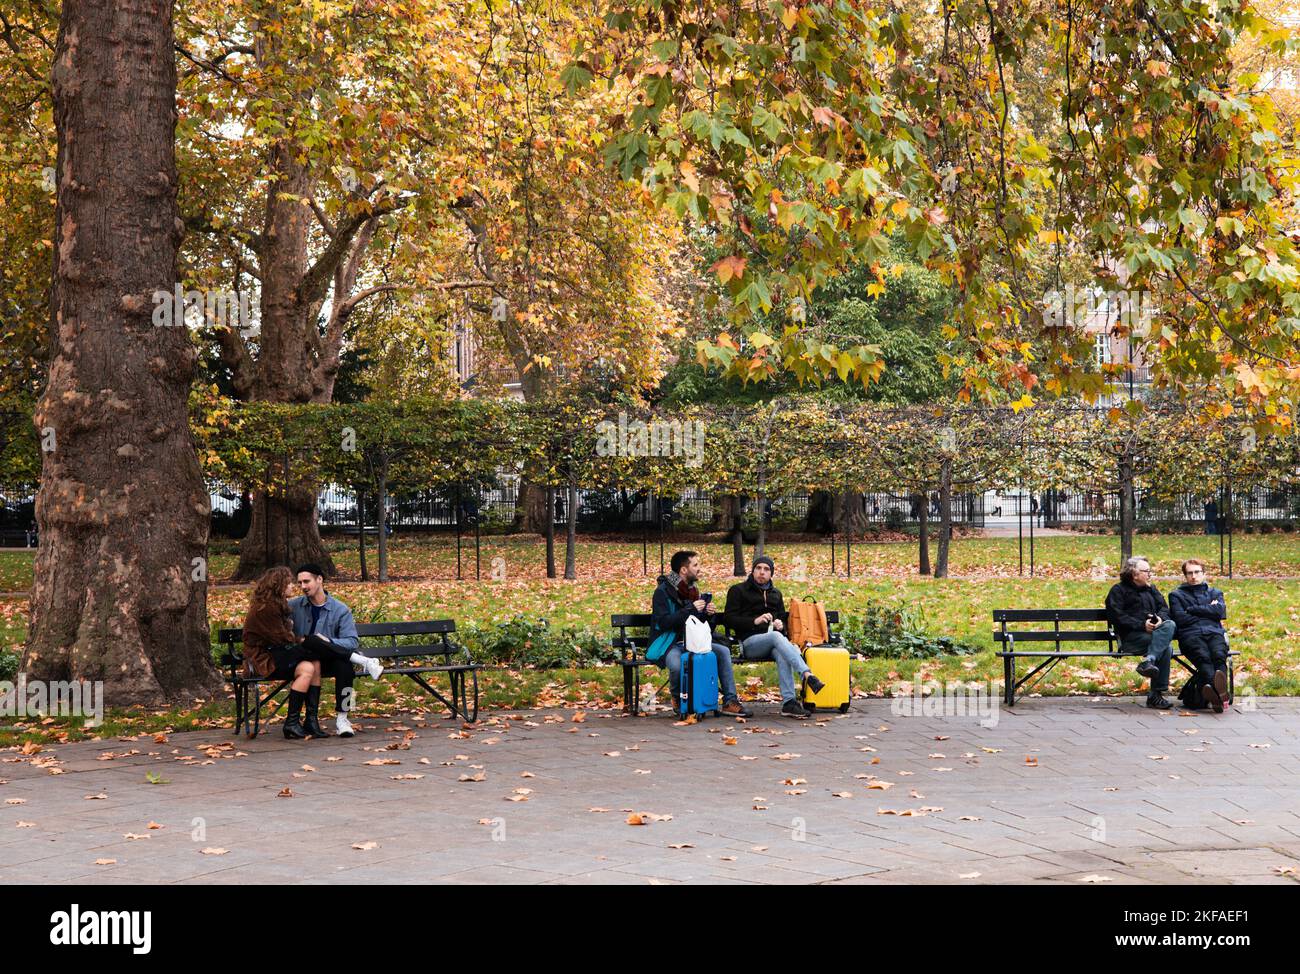 Russell Square London; persone sedute su panchine a Russell Square in autunno, Bloomsbury London UK Foto Stock